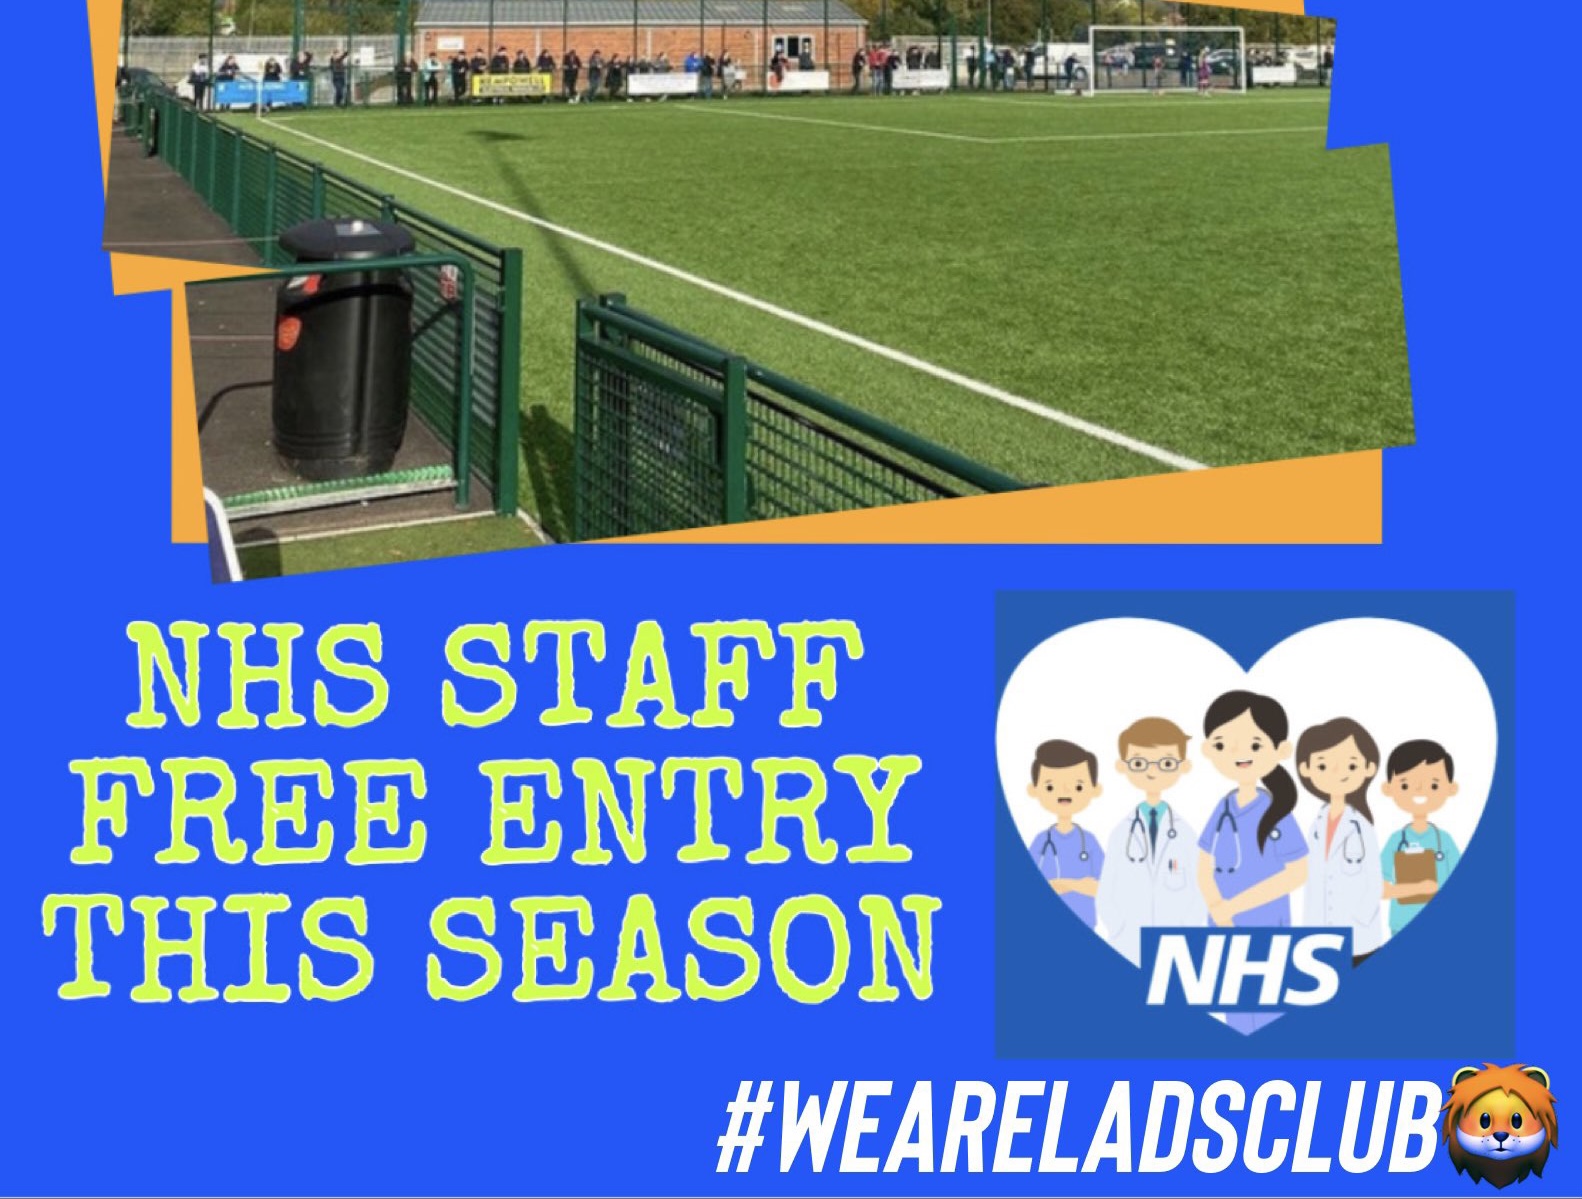 FOOTBALL | Hereford Lads Club offer free entry to all NHS staff during the forthcoming season